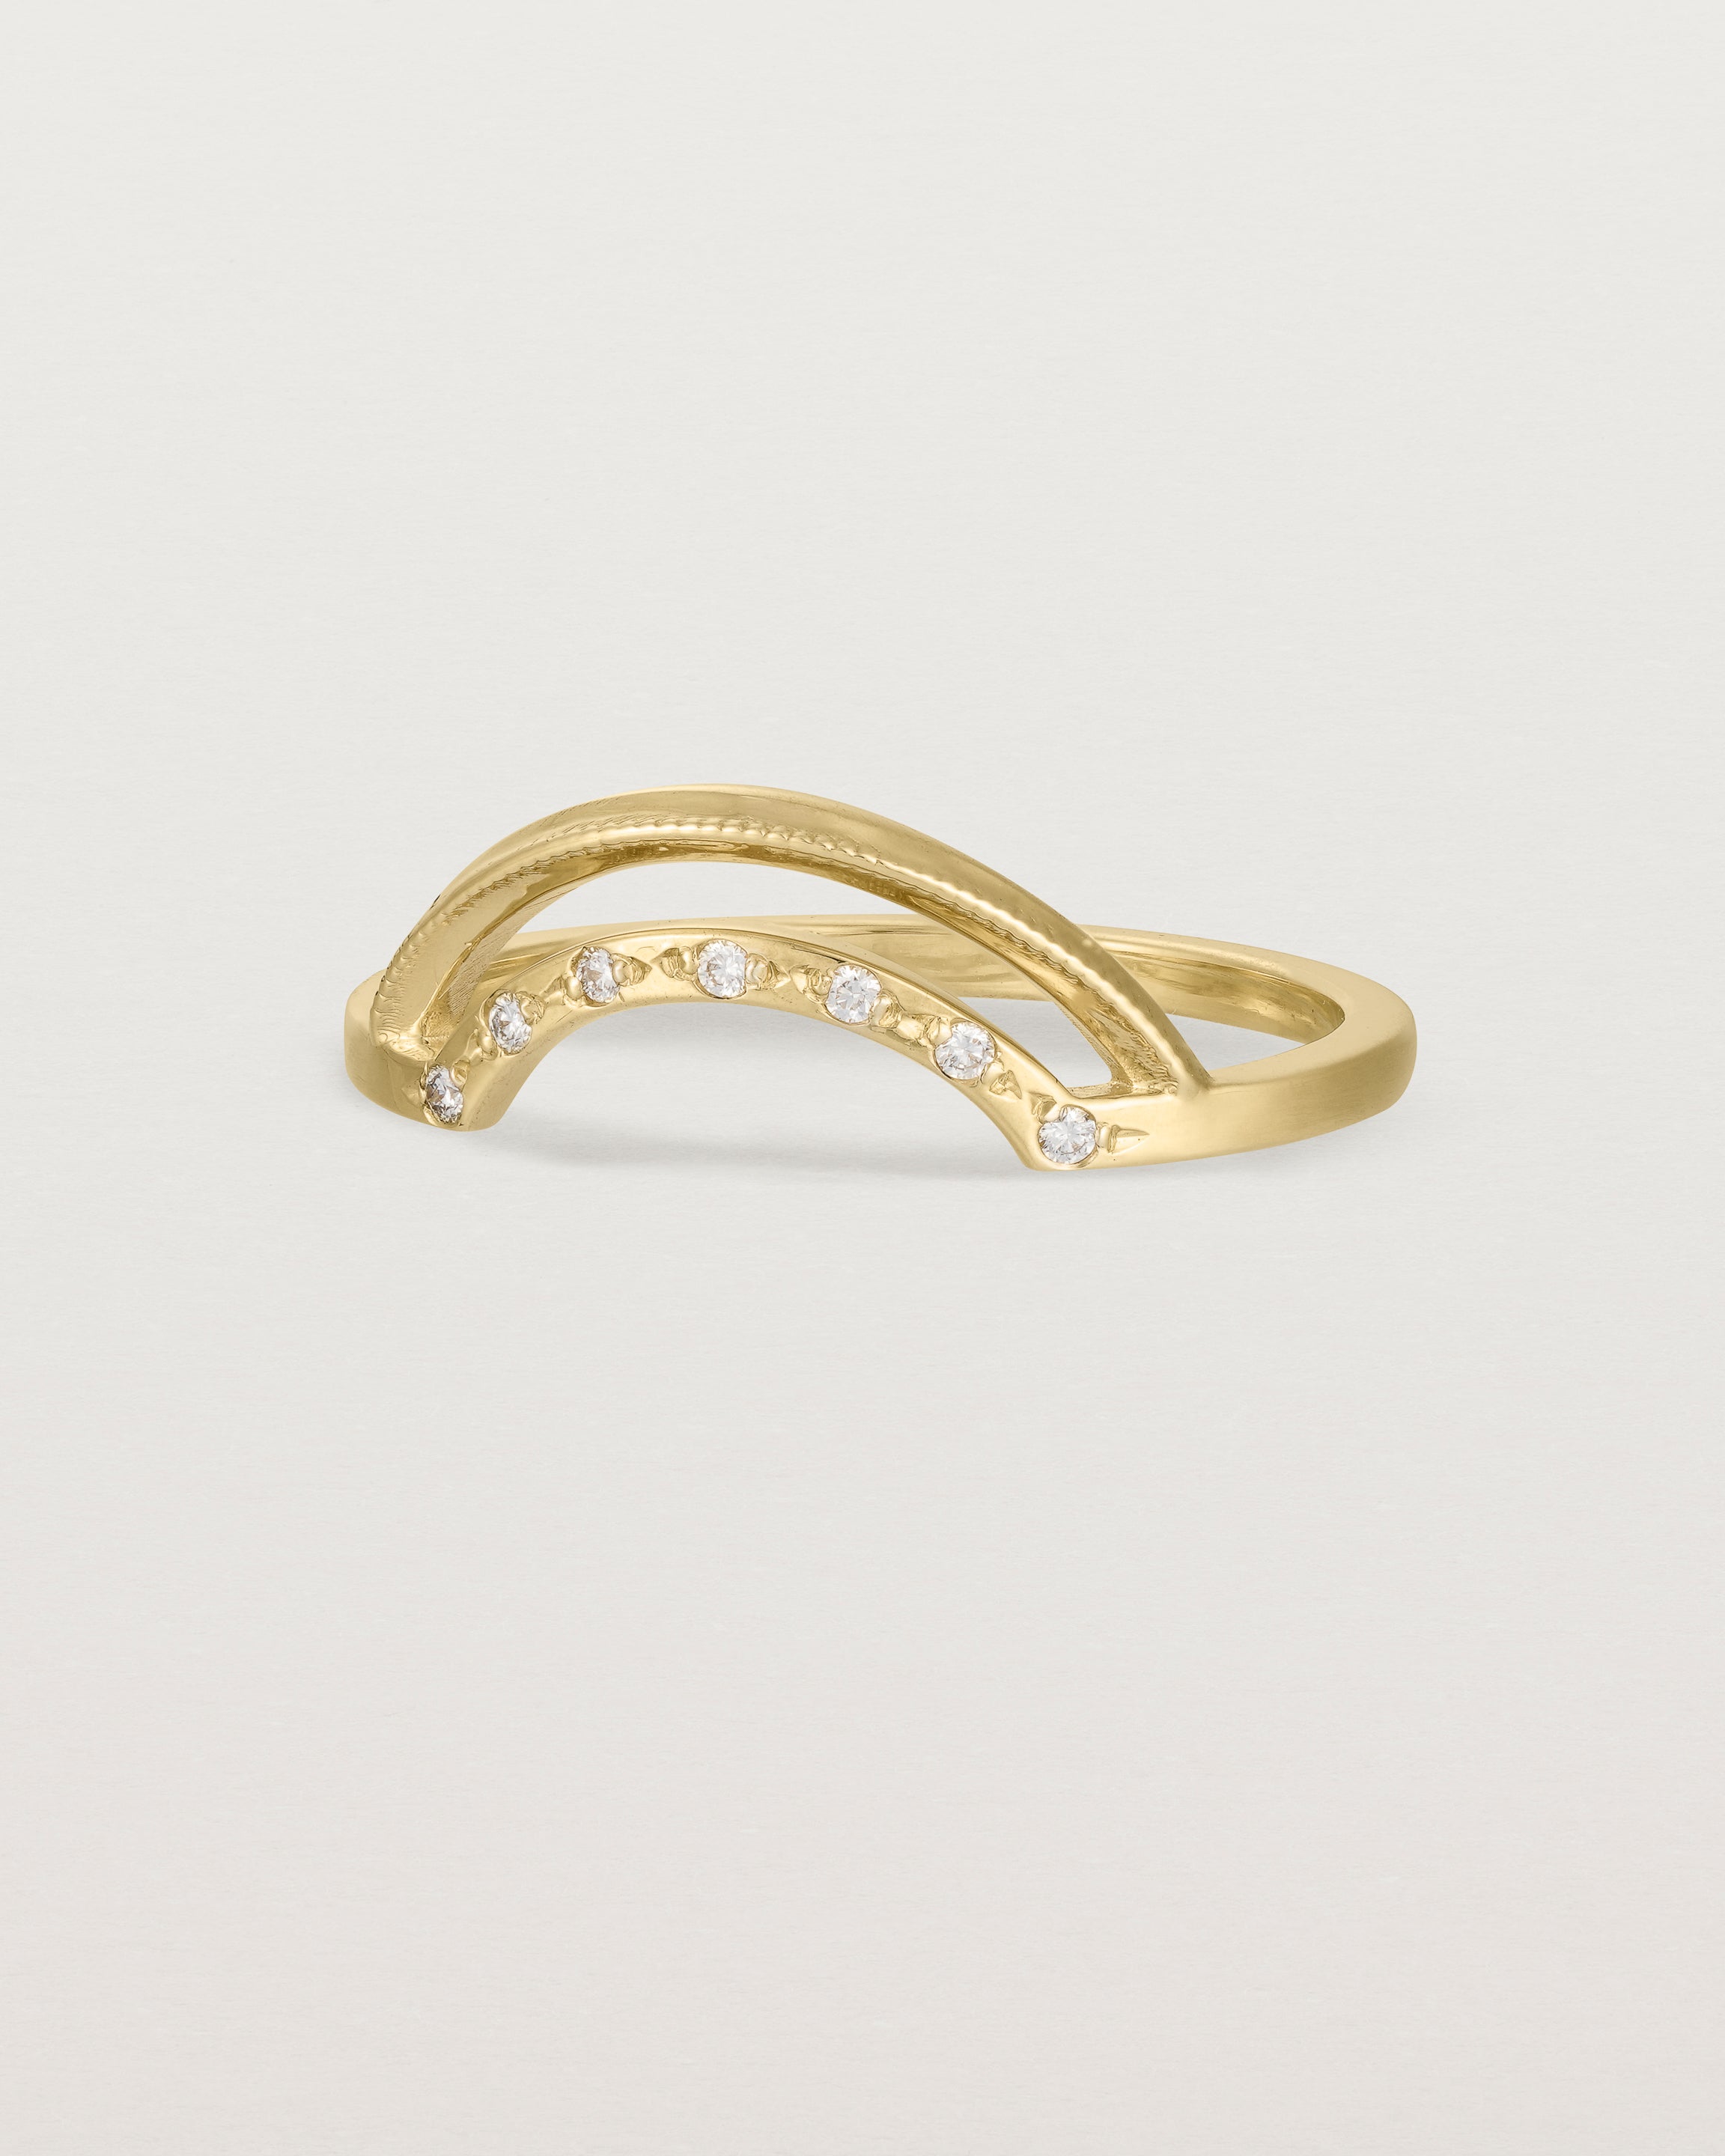 Fit three of a double arc crown ring with white diamonds adoring the inner arc - crafted in yellow gold.